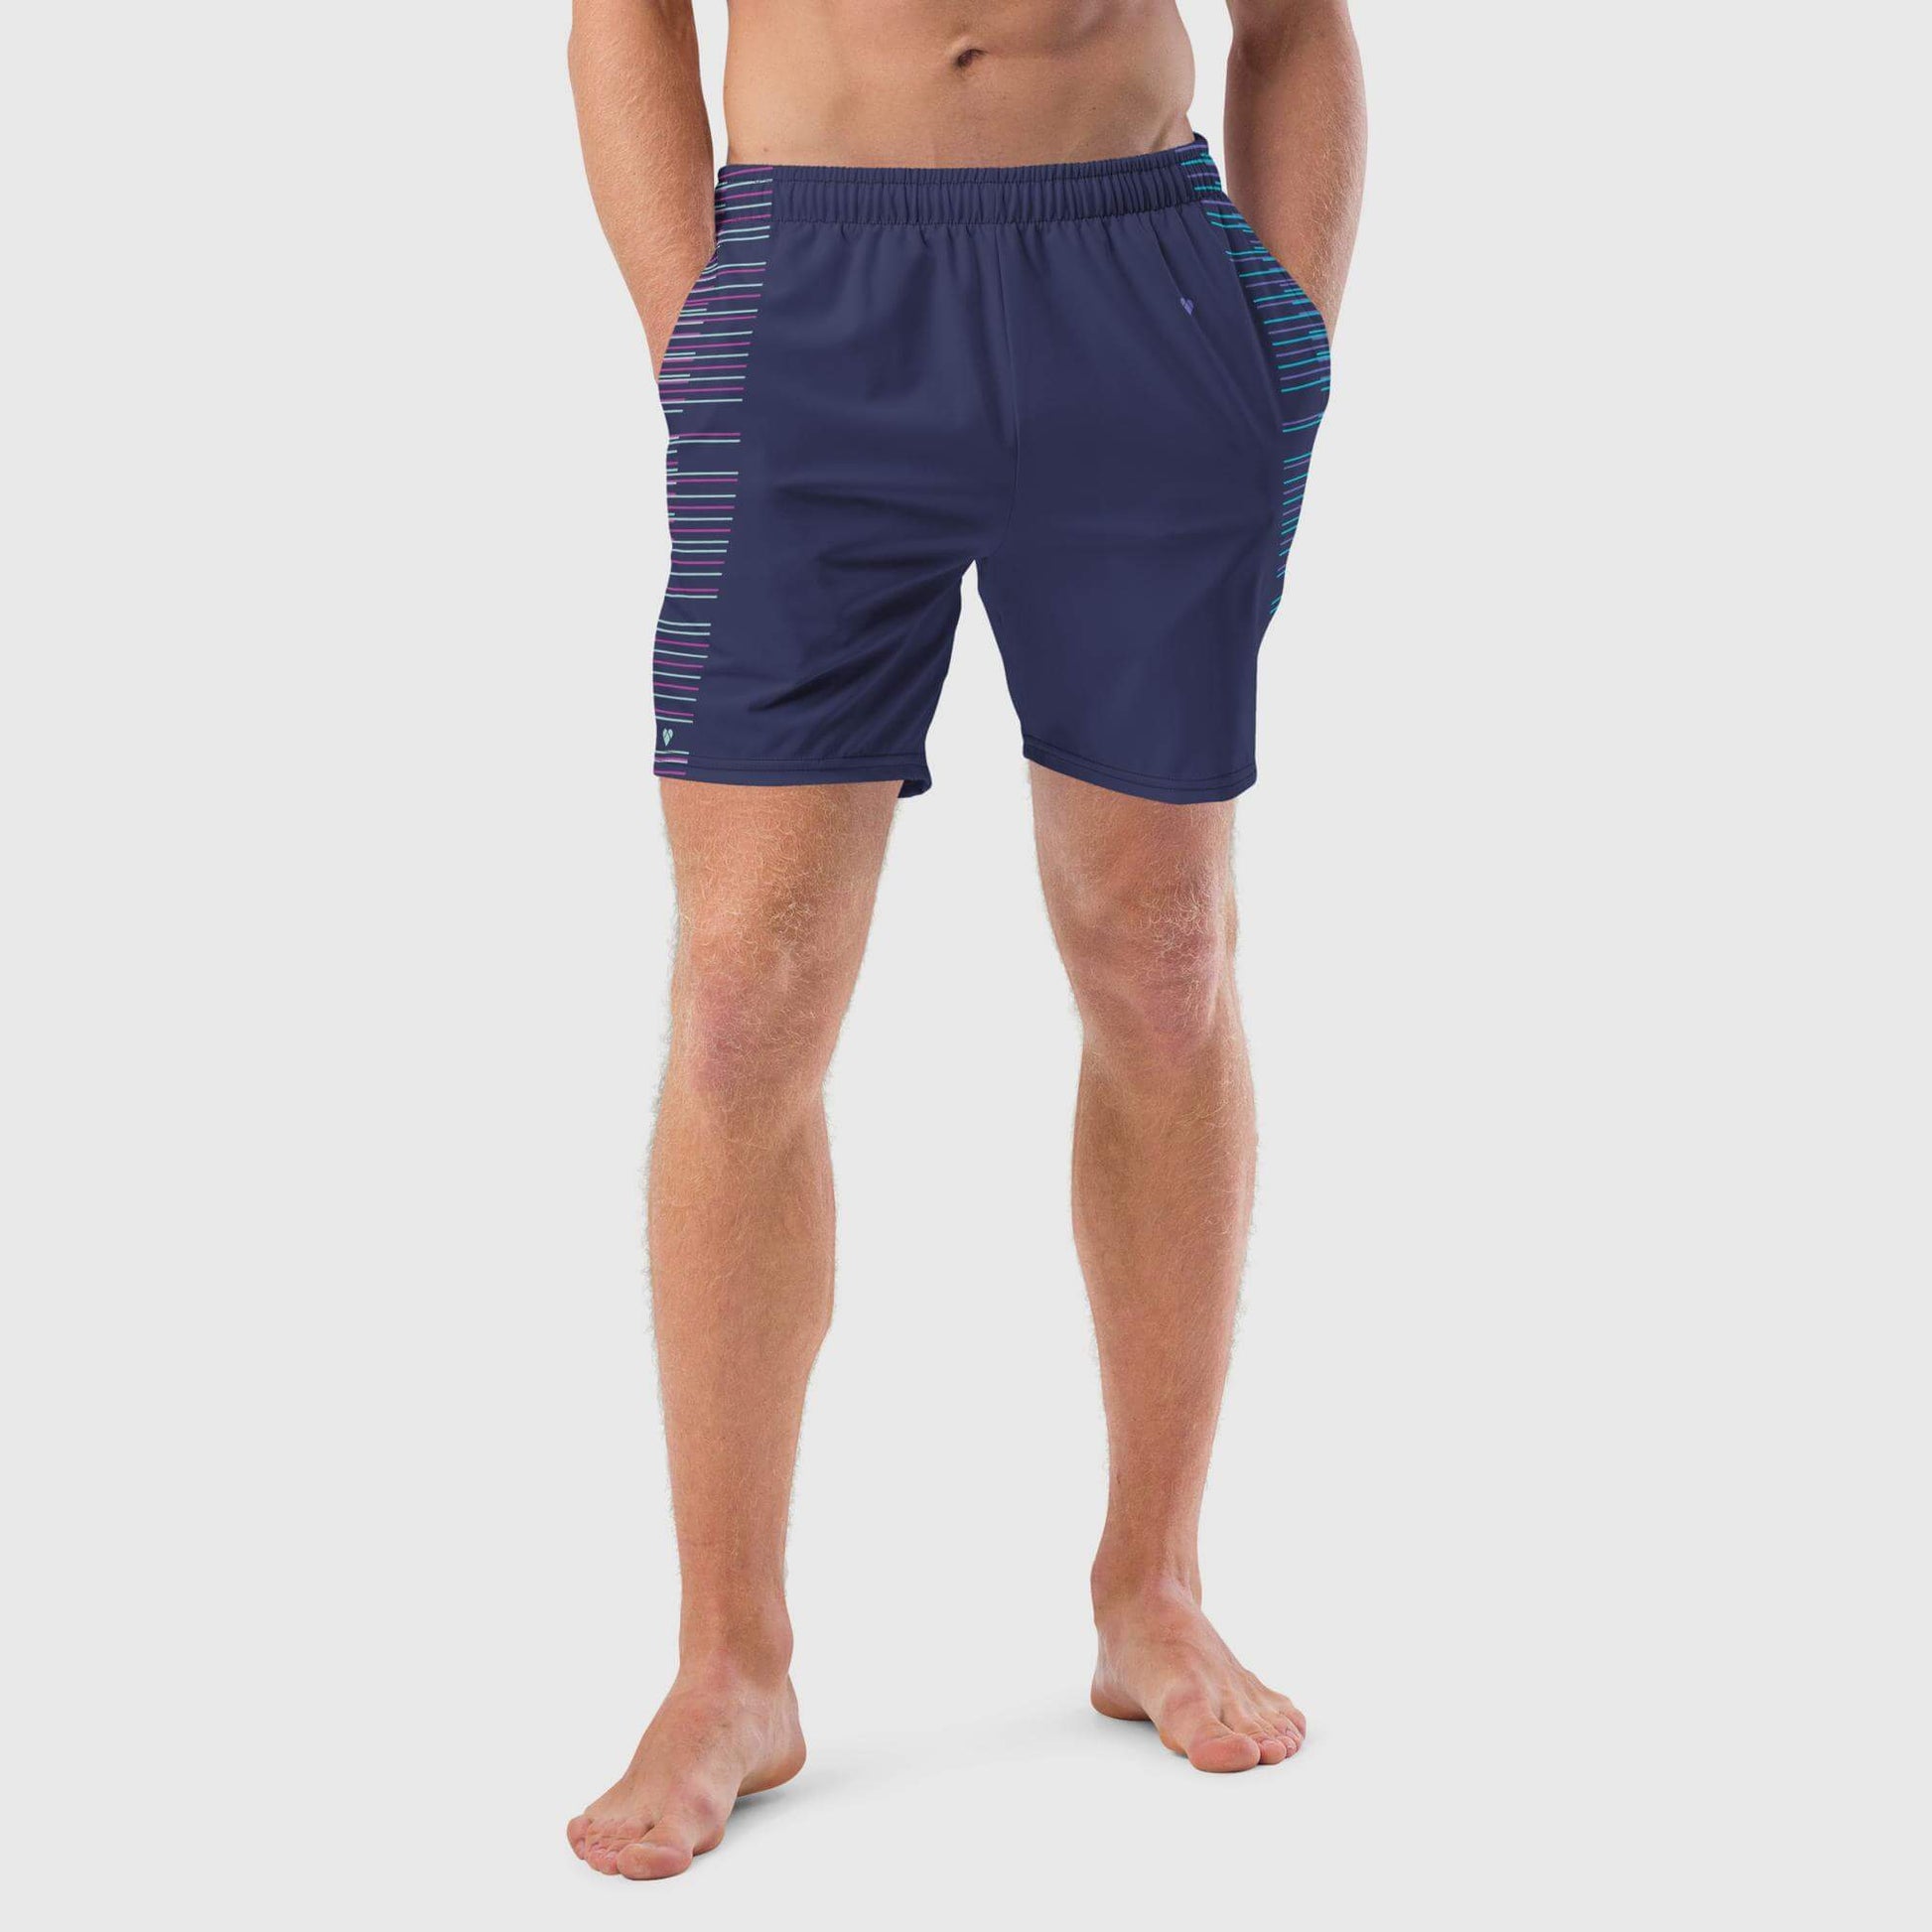 Confidence and style redefine with CRiZ AMOR's Slate Blue Dual Swim Trunks